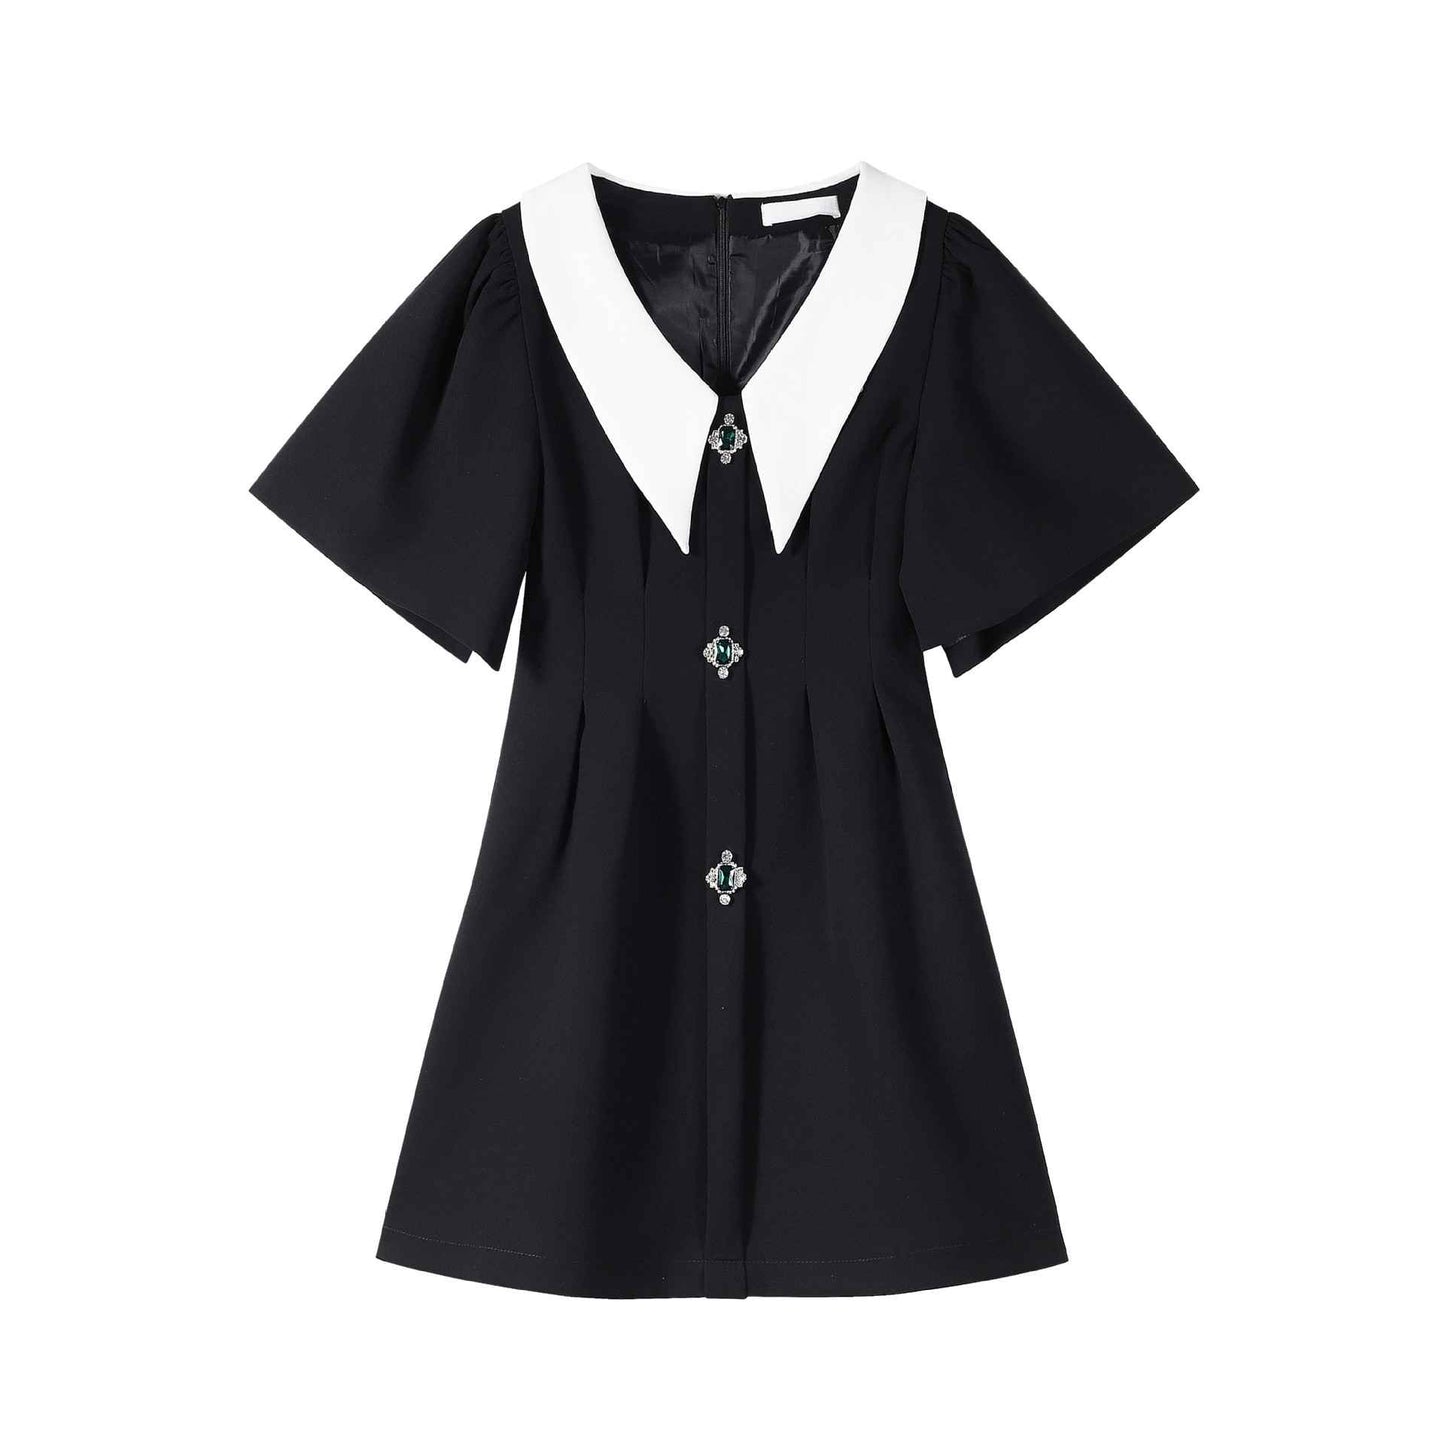 G-IDLE Miyeon Inspired Black French Collared Dress